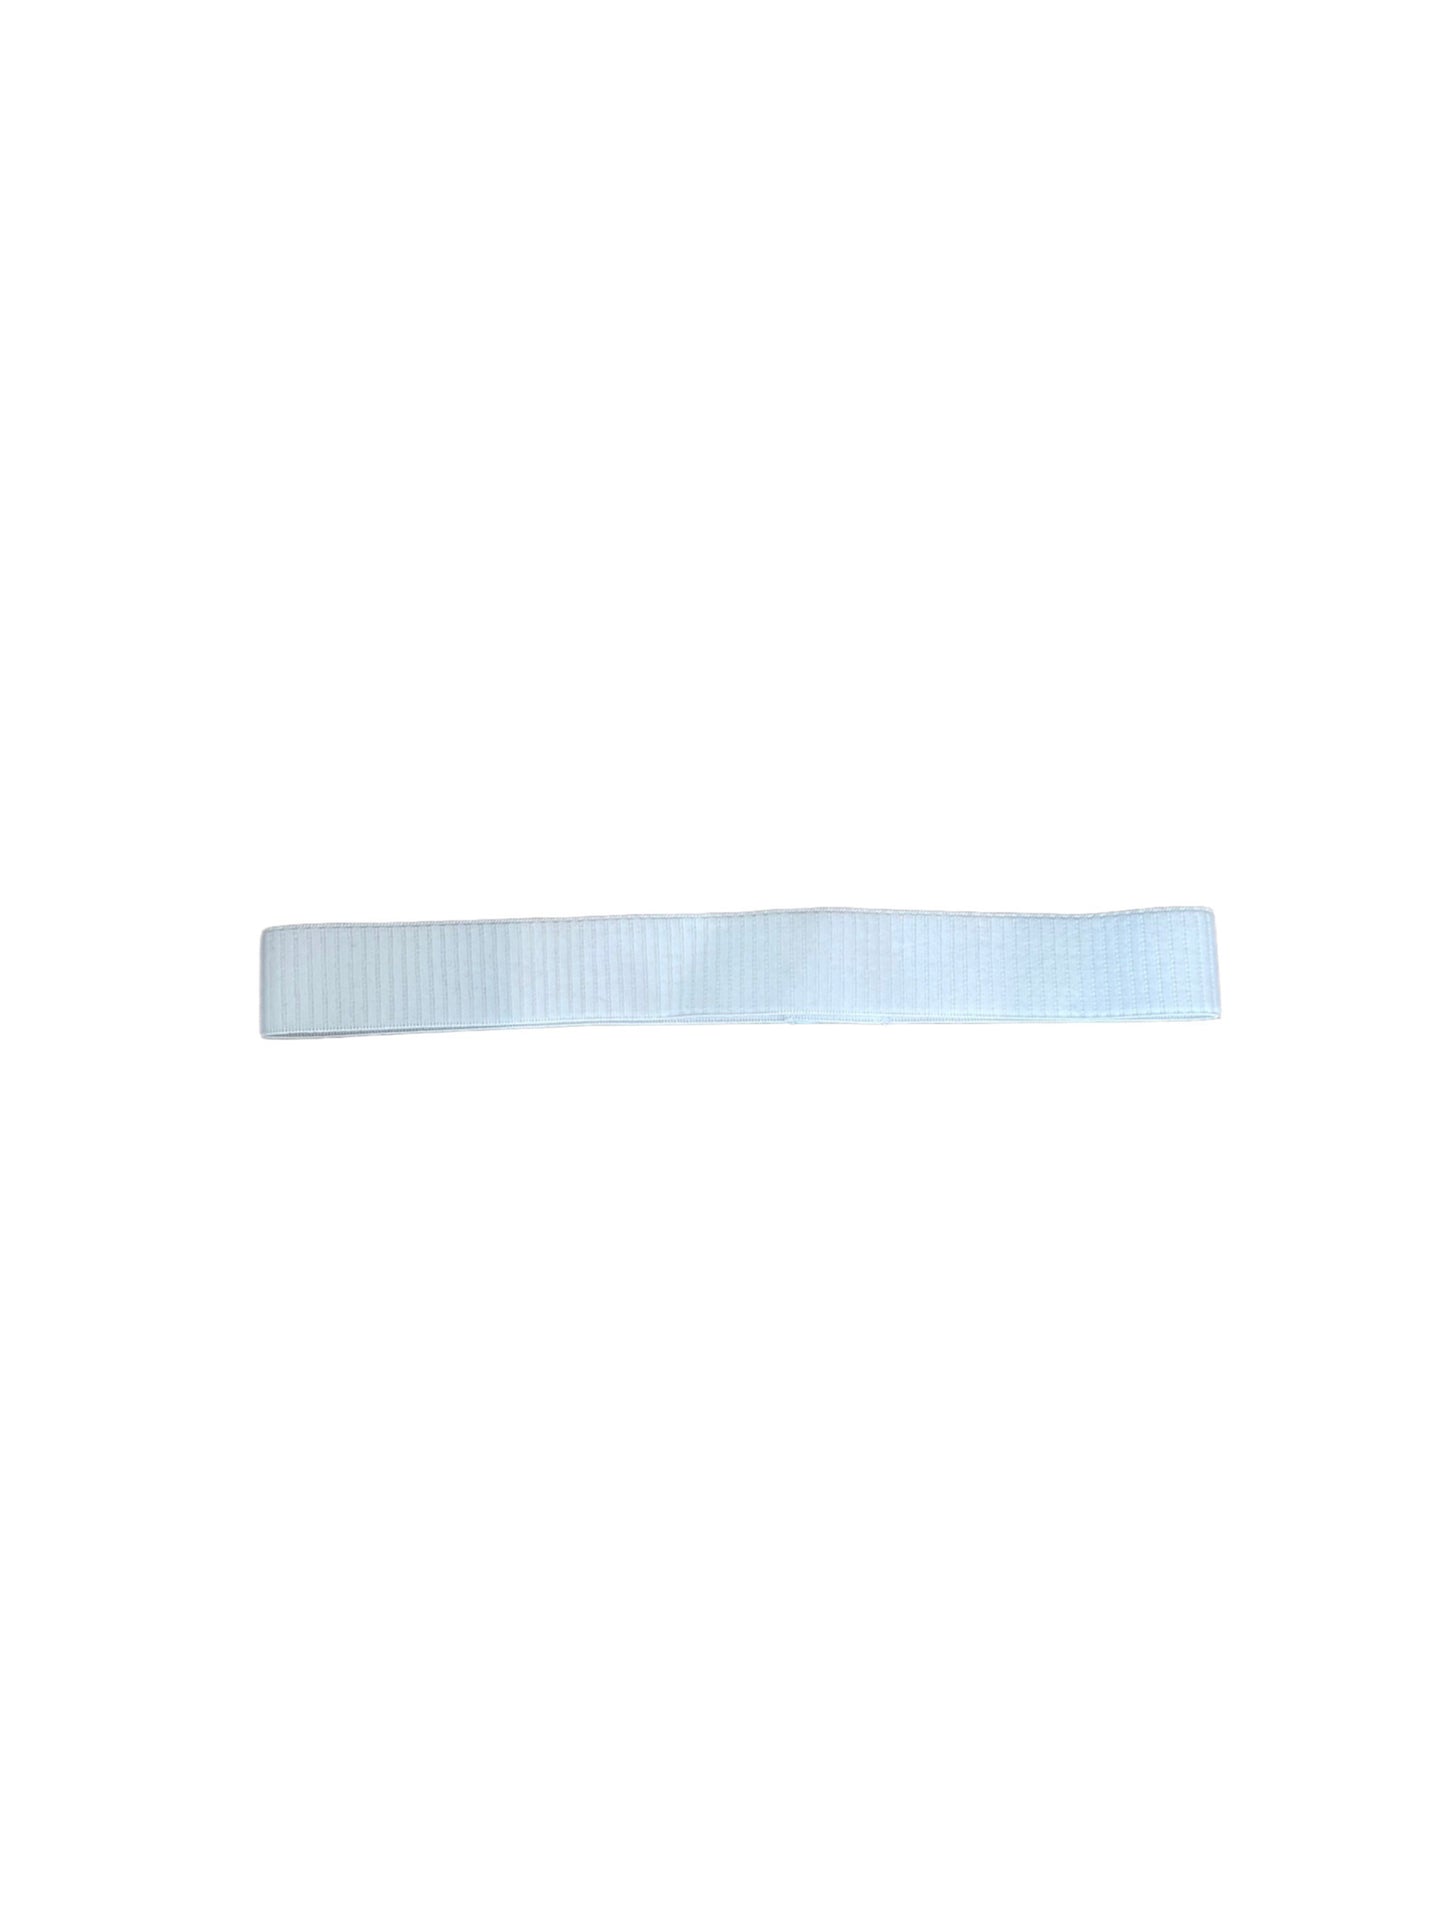 elastic hat band 1 inch white ribbed